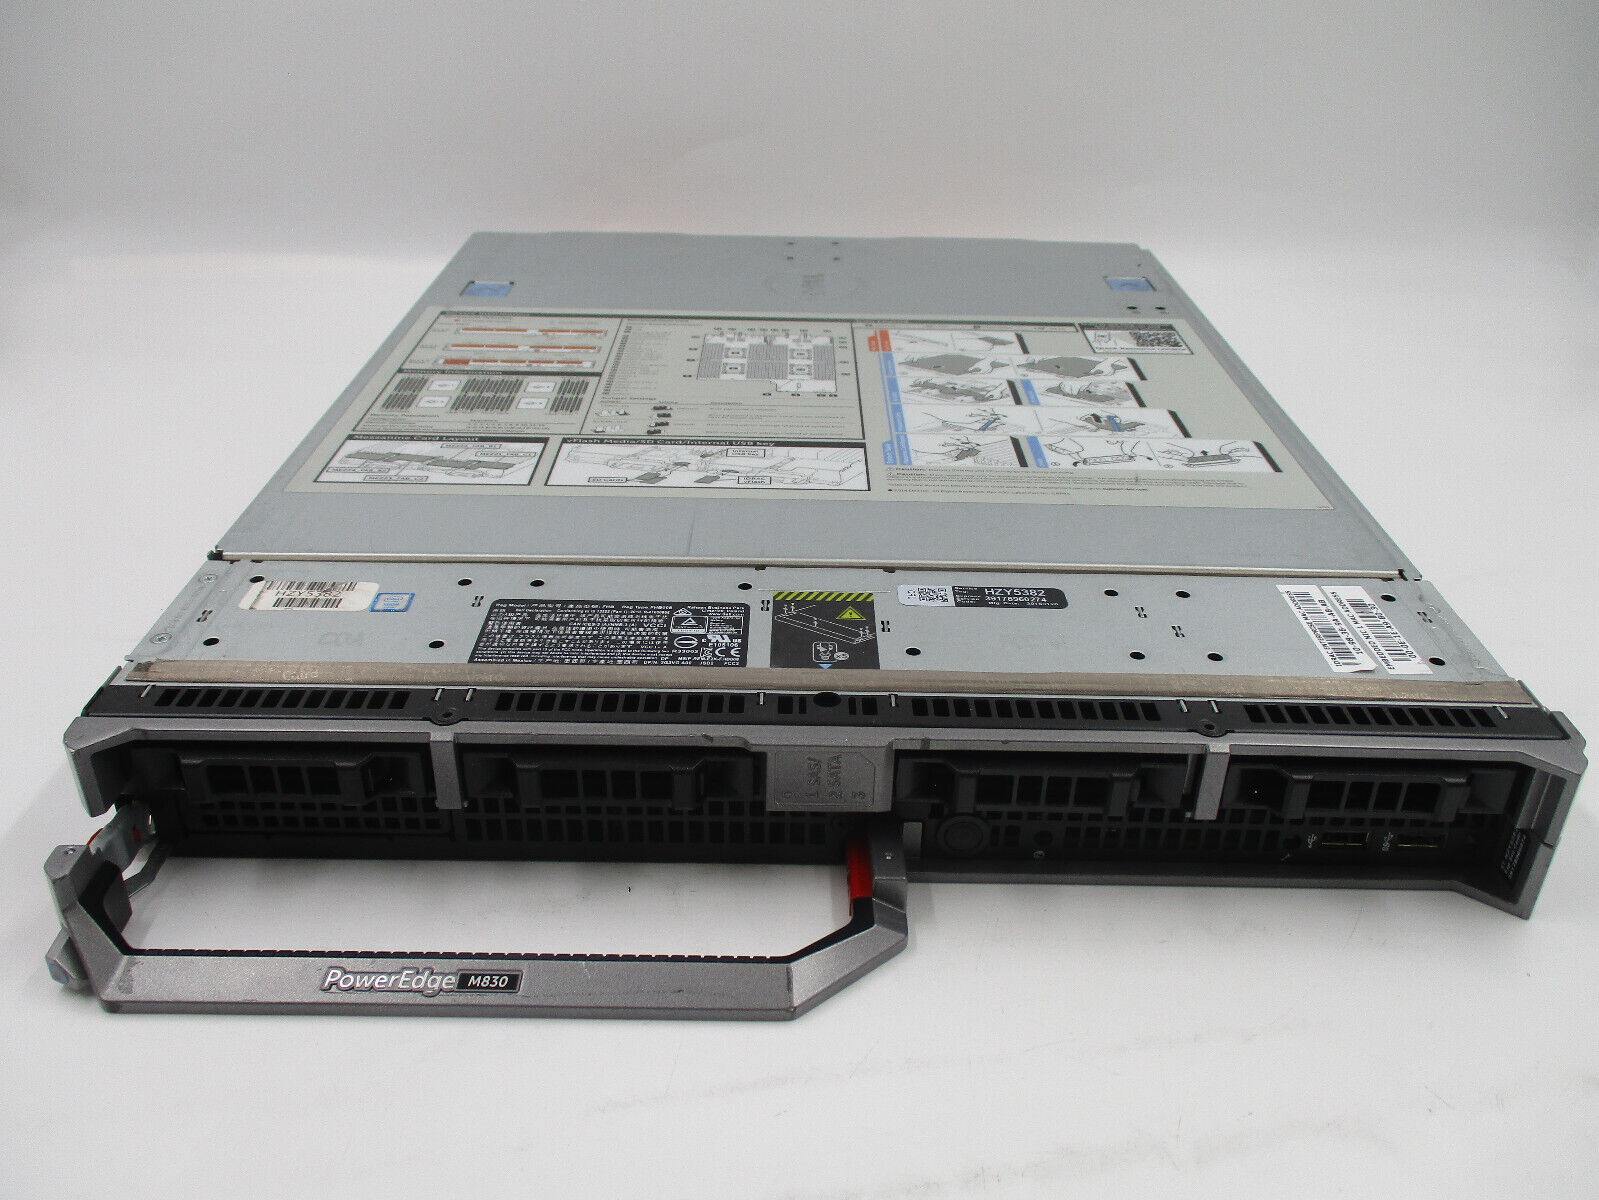 Dell PowerEdge M830 Barebone With Motherboard 4x Xeon E5-4627 V3 CPU Tested